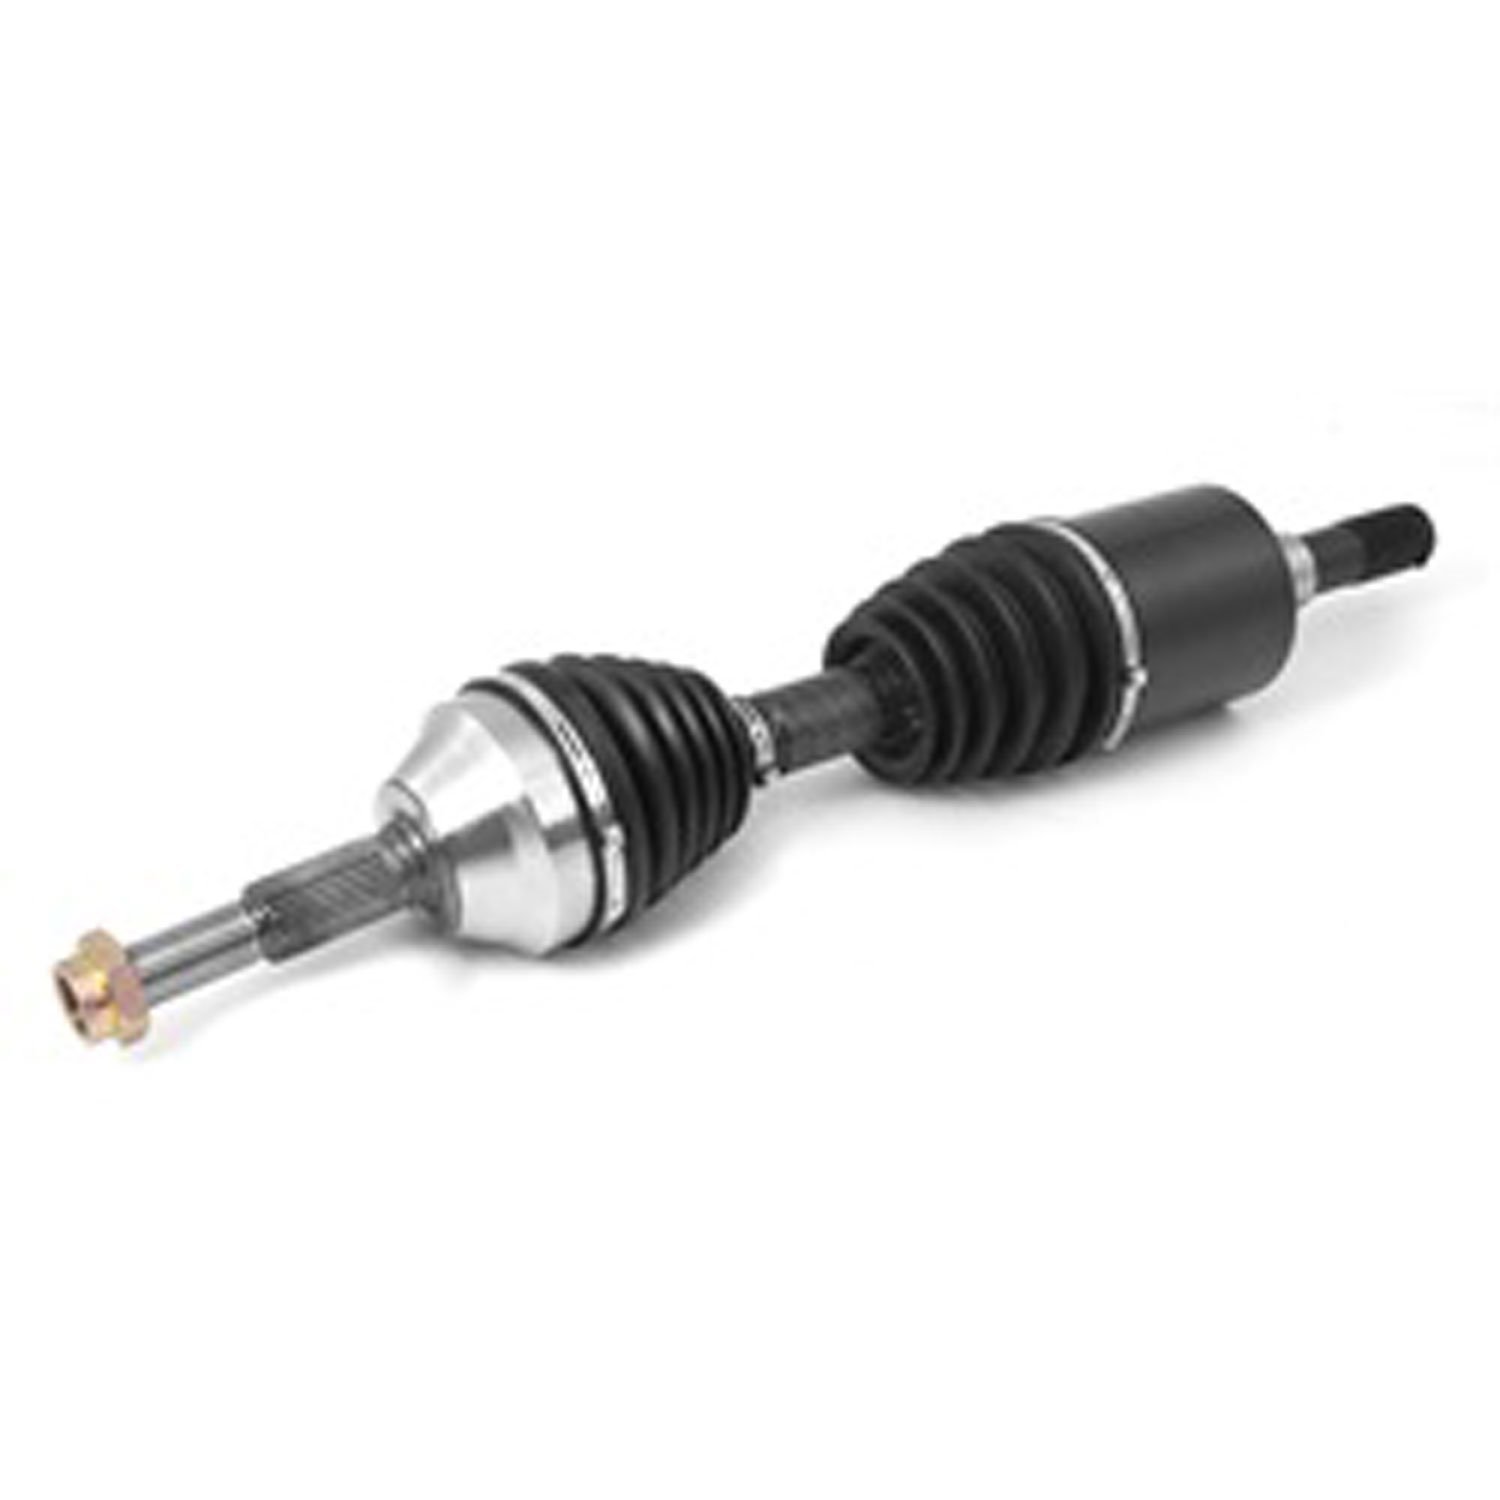 This front axle shaft assembly from Omix-ADA fits the left side on 02-06 Jeep Libertys with Dana 30 front axle.